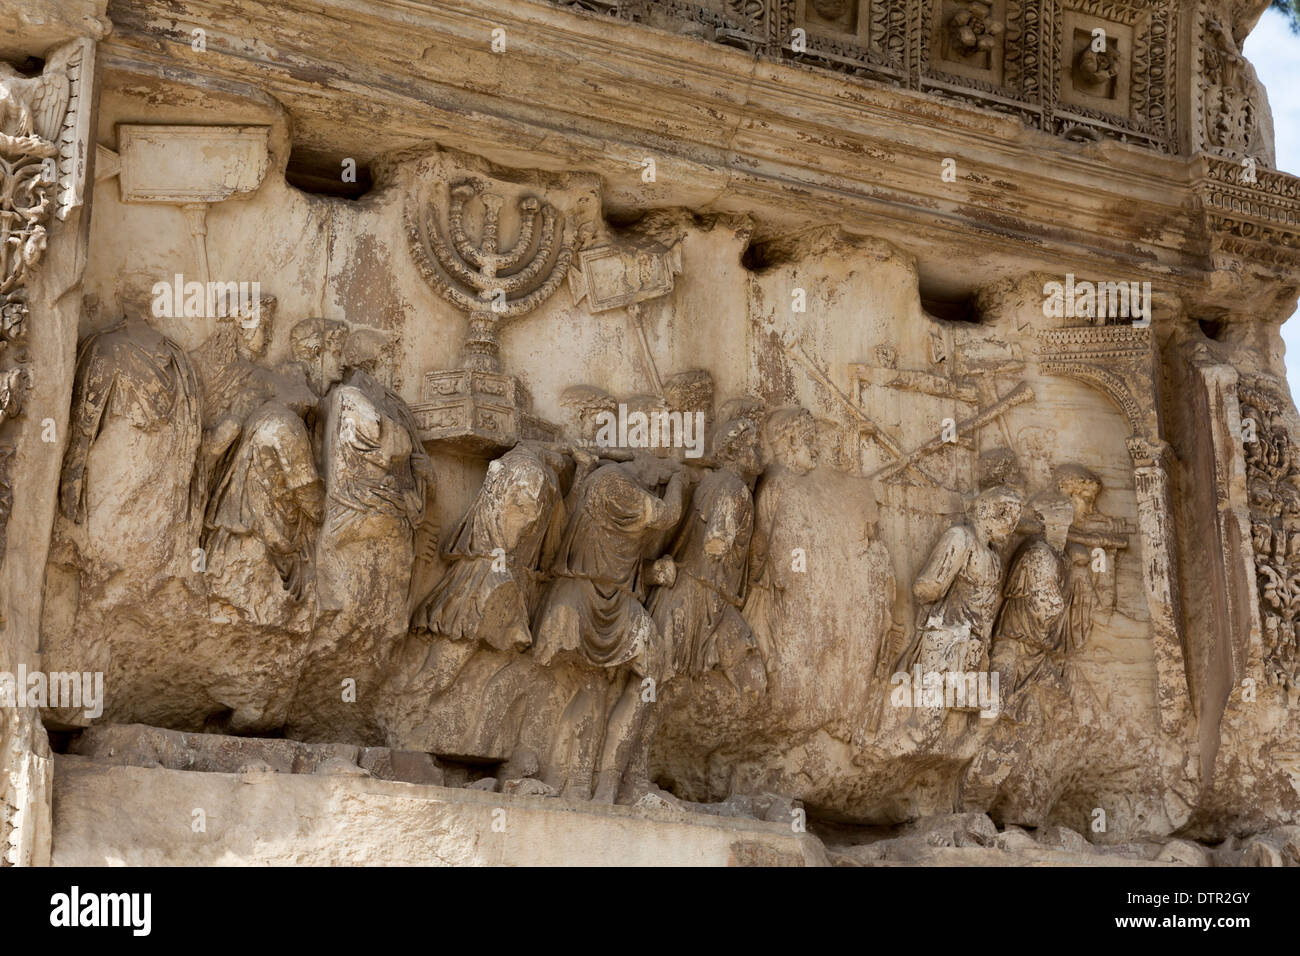 The spoils taken from the Temple in Jerusalem. south panel, the Arch of Titus, Roman Forum, Rome, Italy Stock Photo